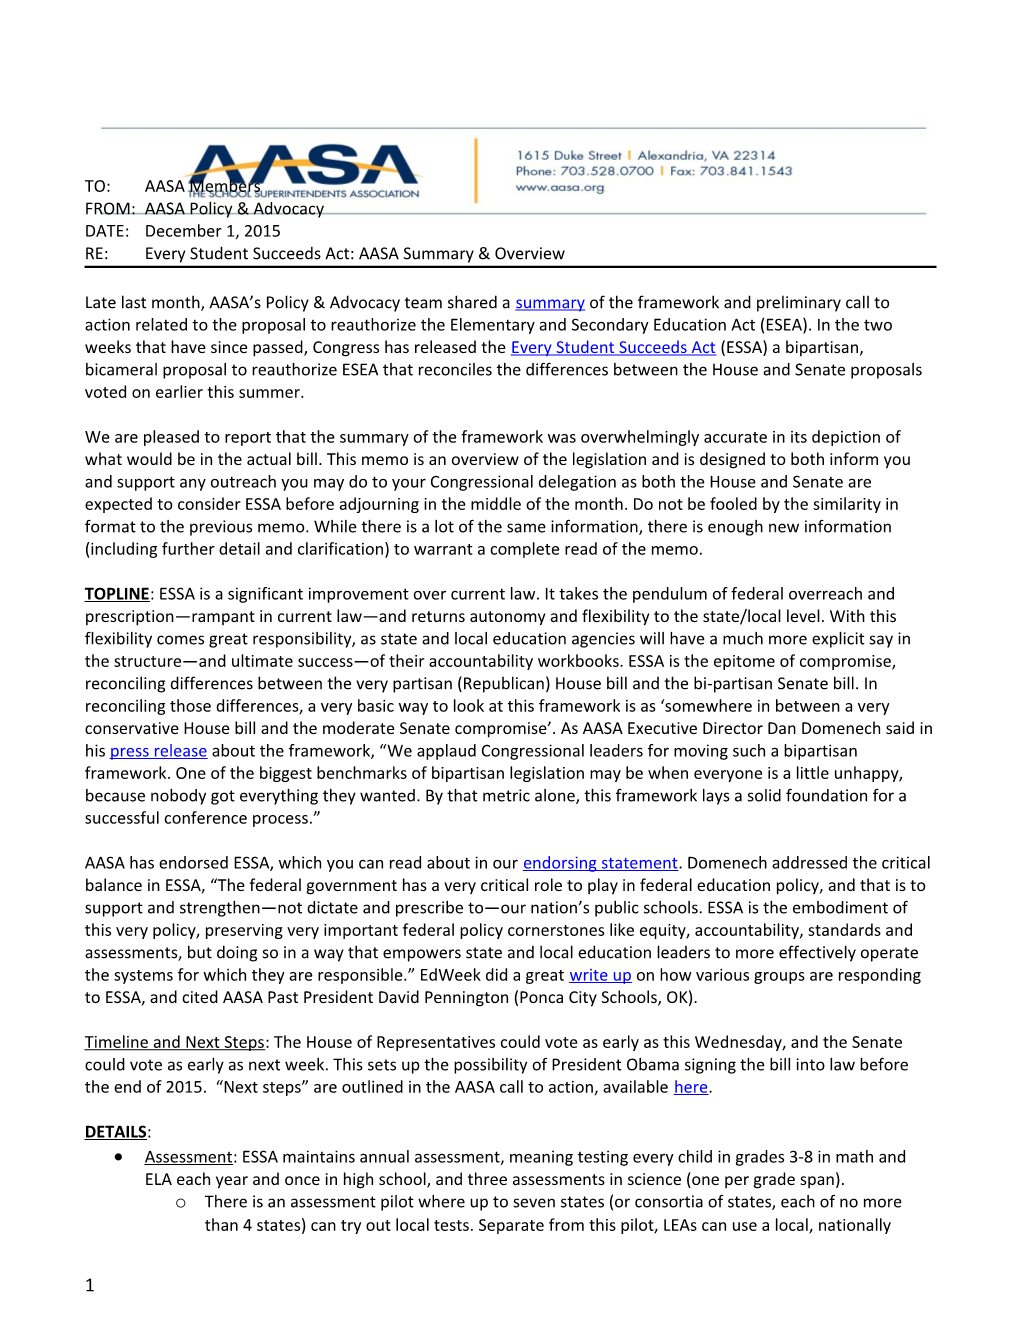 RE: Every Student Succeeds Act: AASA Summary & Overview